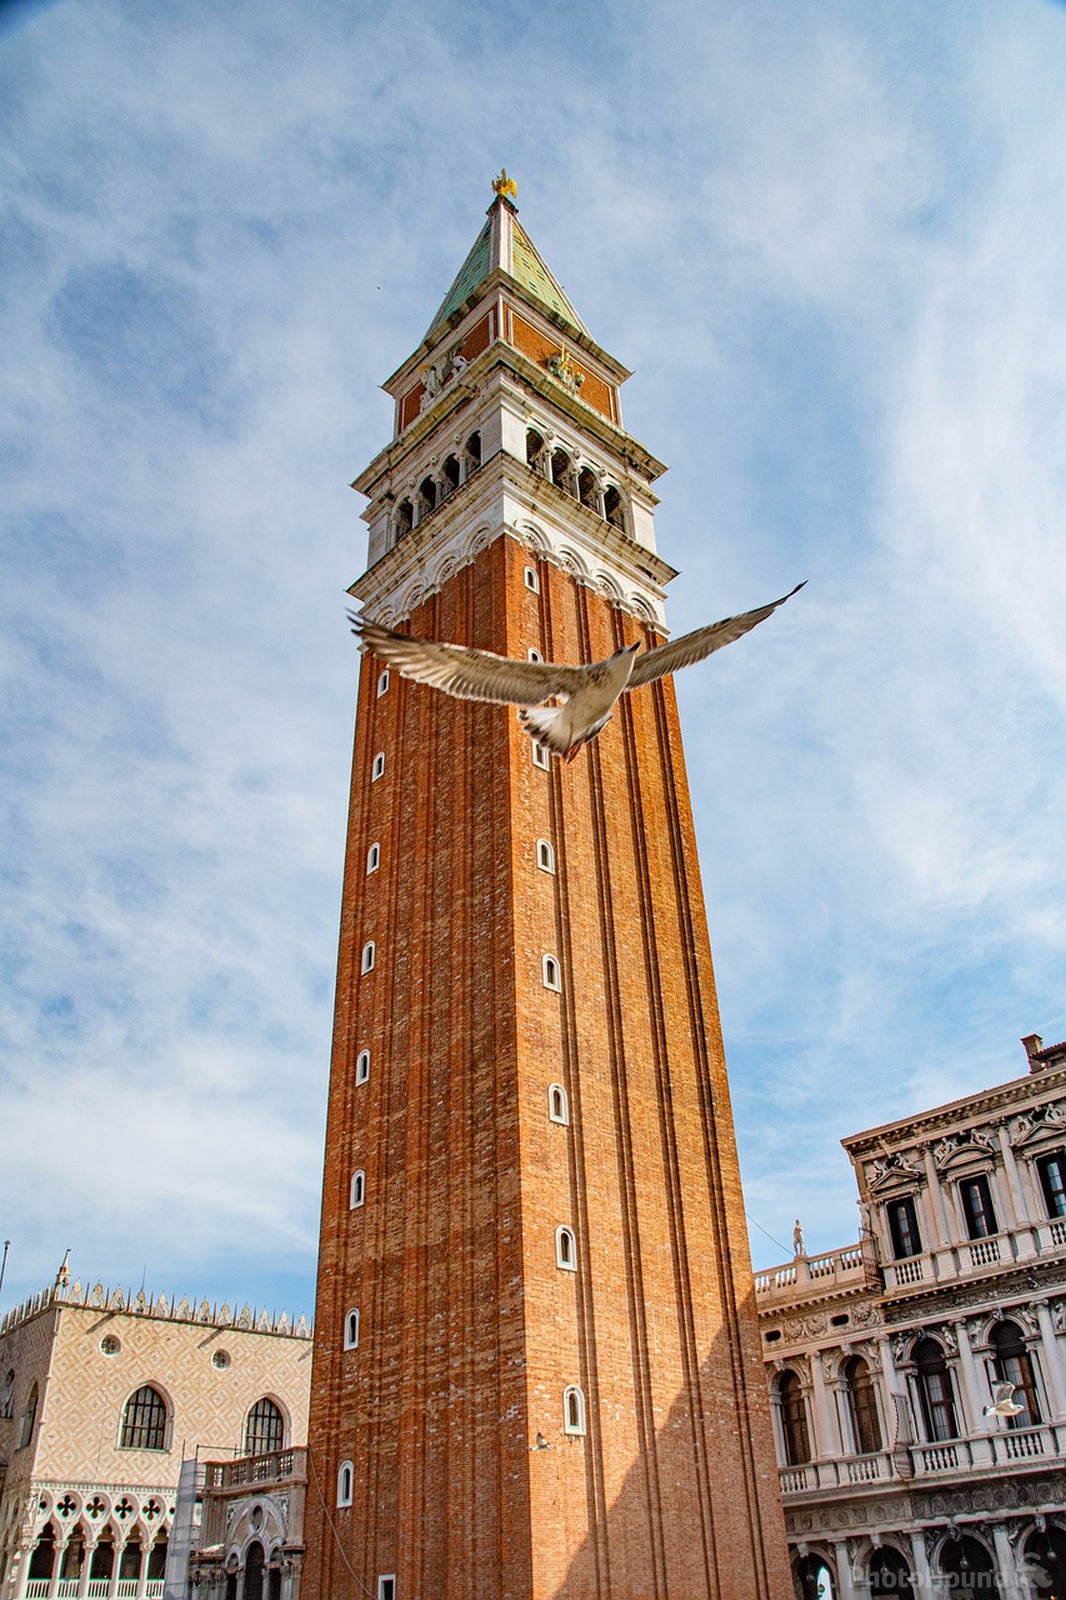 Image of Piazza San Marco (St Mark\'s Square) by Team PhotoHound